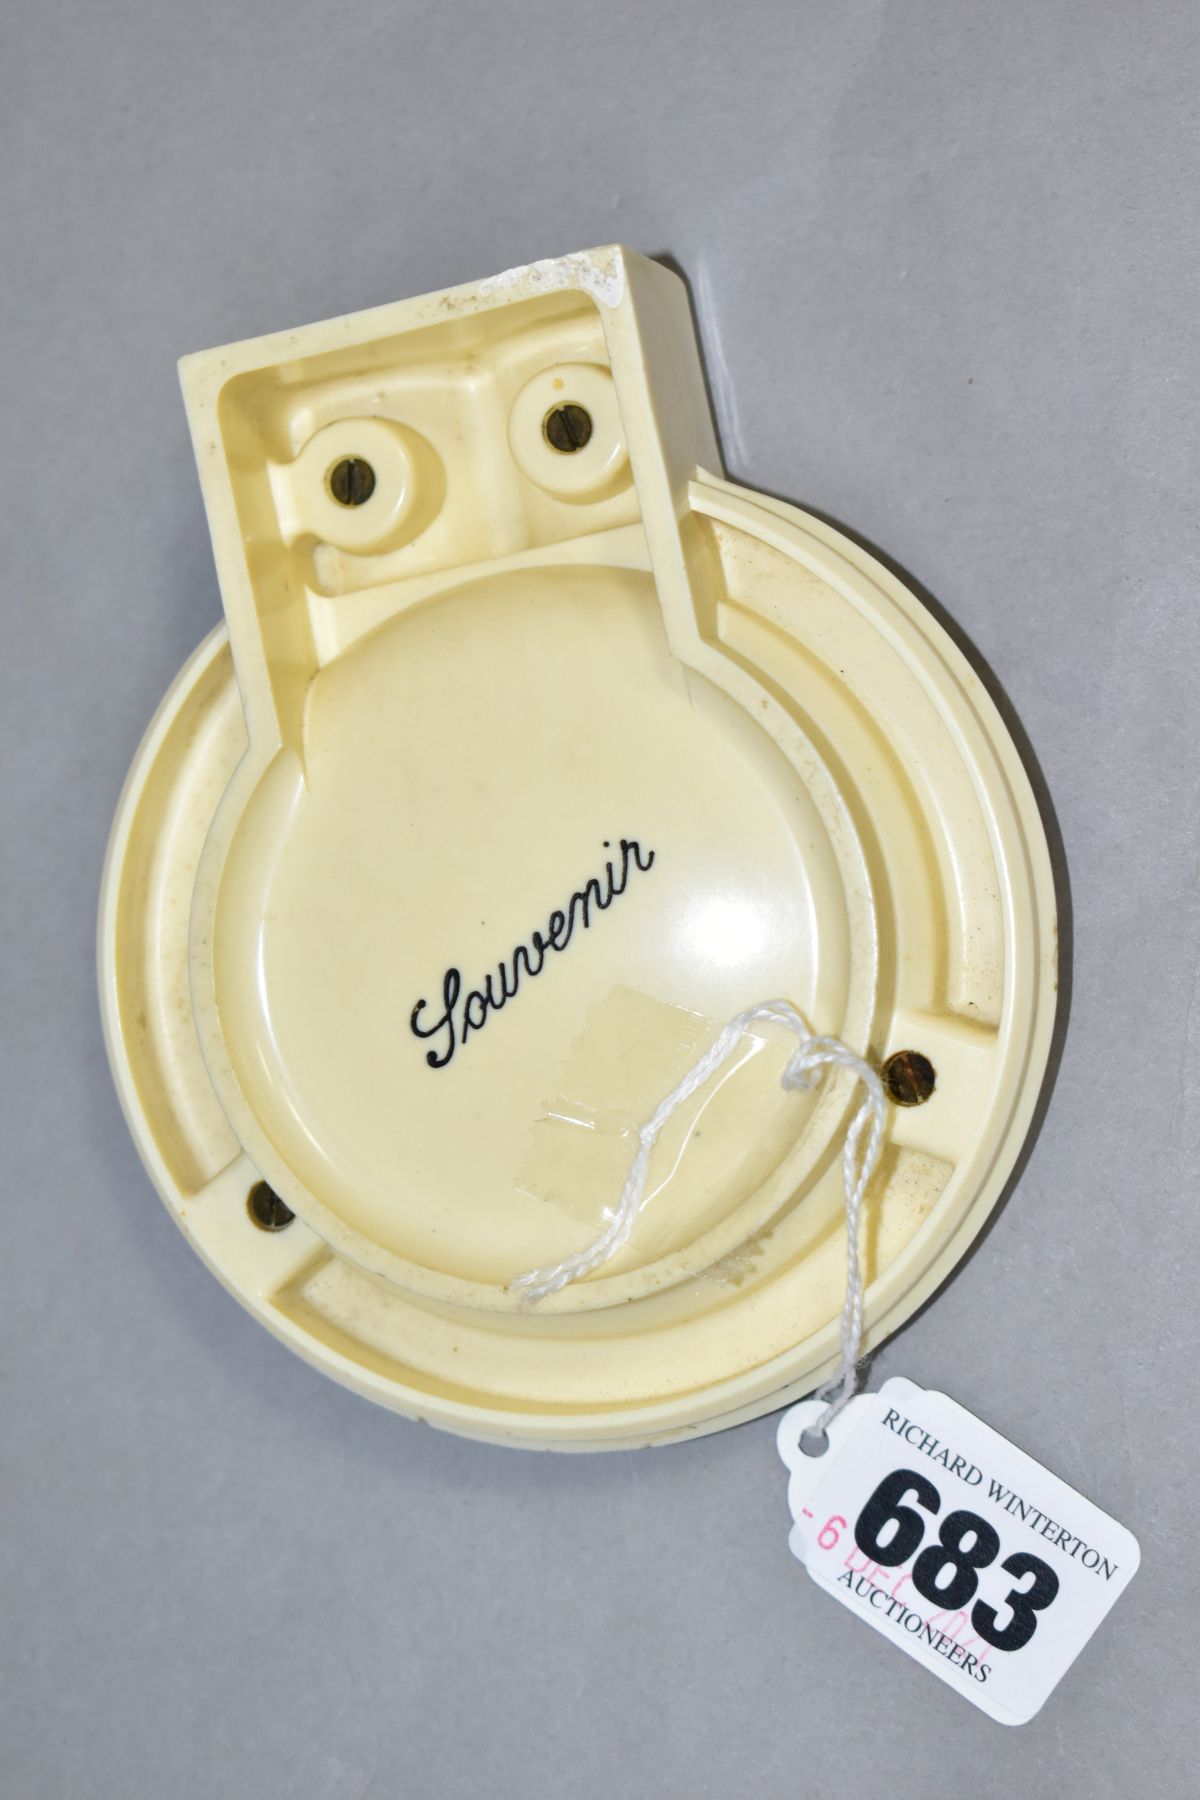 AN ART DECO BAKELITE RMS QUEEN MARY ASHTRAY, in cream and black, with RMS Queen Mary marked on one - Image 4 of 5